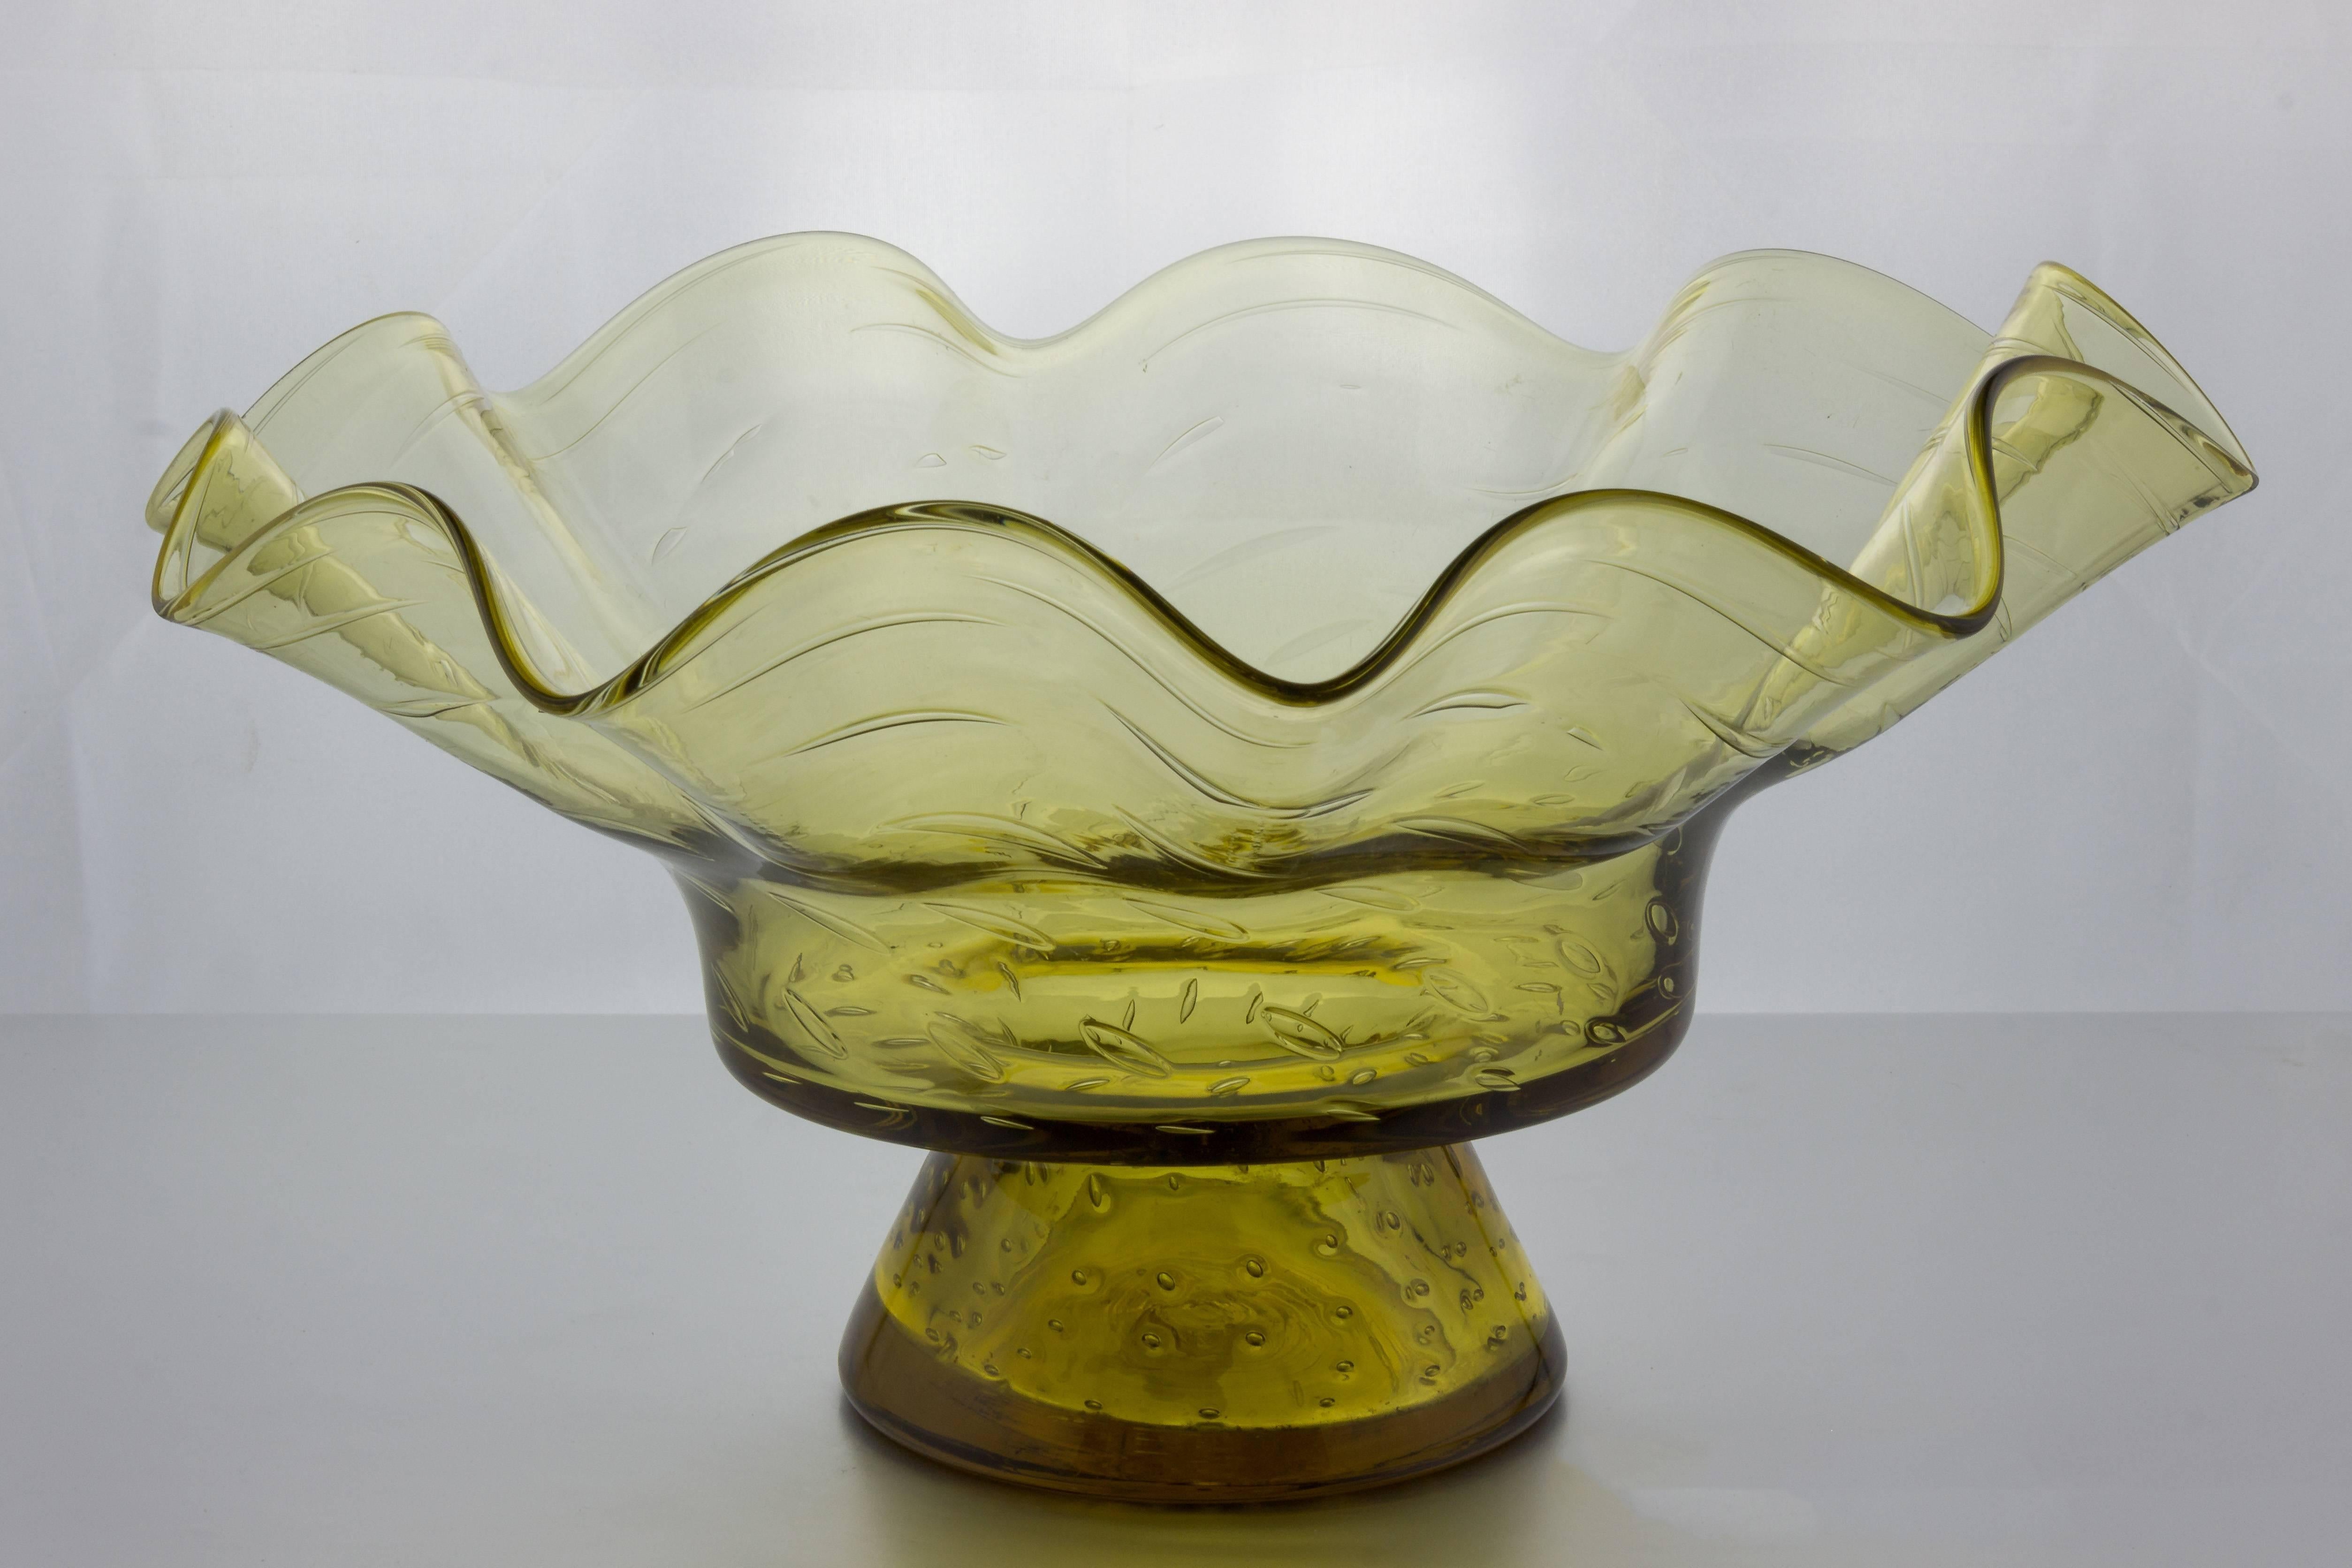 This  American 1960s Blenko glass bowl  is a charming embodiment of vintage beauty. Its ruffled design and light yellow color create a delightful visual appeal, while the bubble inclusions in the glass add a unique touch of character. The bowl